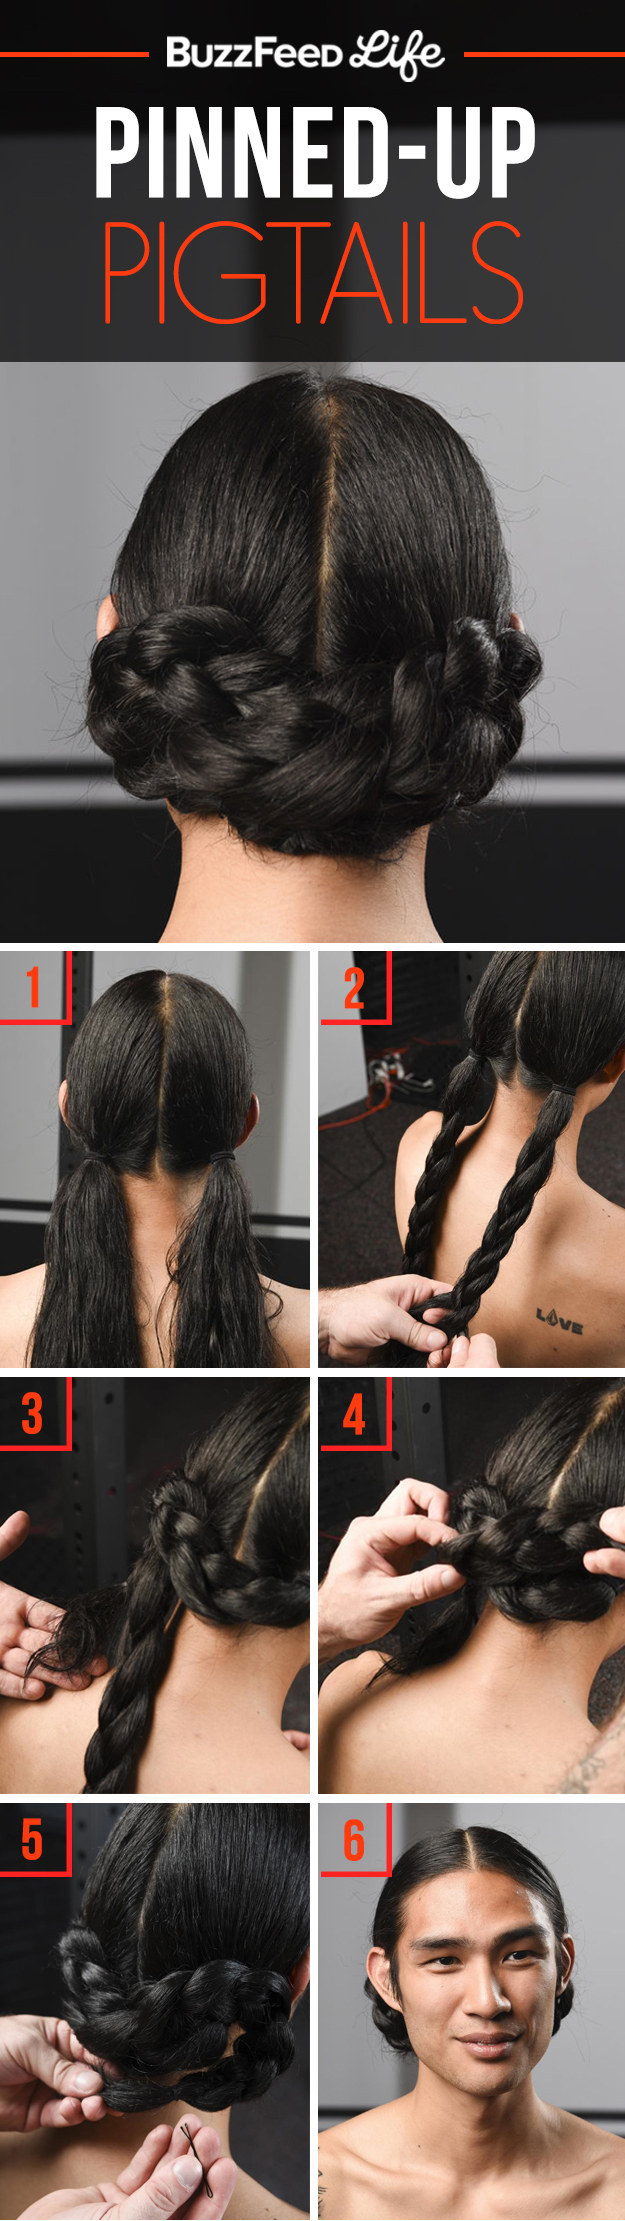 Easy Hairstyles To Do Yourself - Stylish Life for Moms